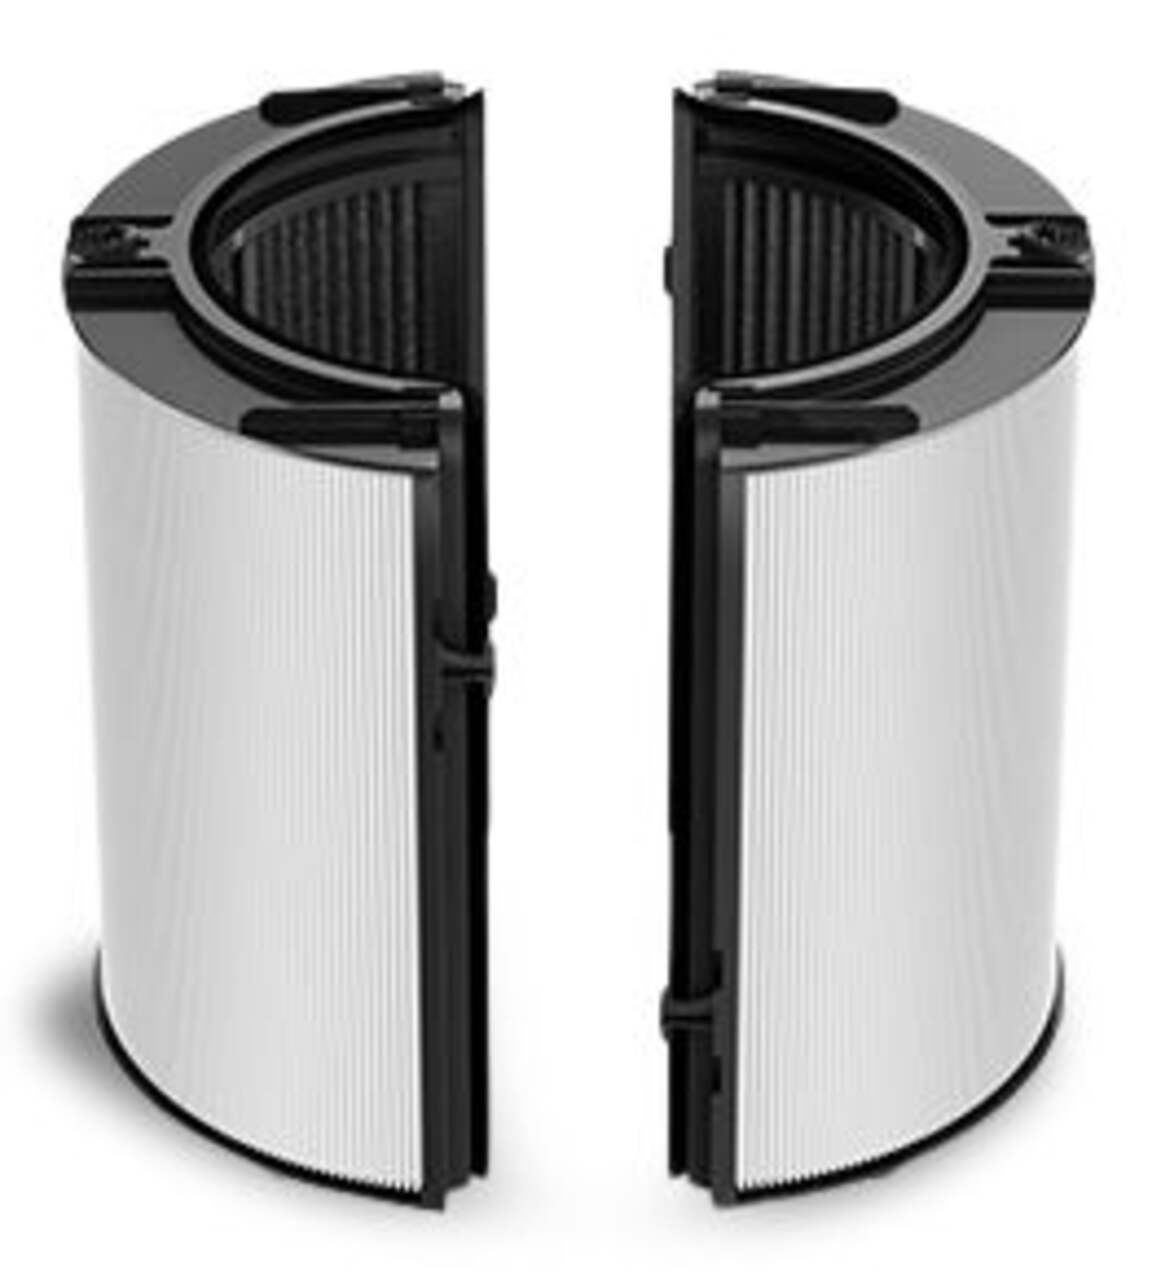 https://media-www.canadiantire.ca/product/fixing/home-environment/home-air-quality-accessories/1430022/dyson-glass-hepa-activated-carbon-combi-filter-b41bb881-ddb6-4653-acb7-1d3b266dfc70-jpgrendition.jpg?imdensity=1&imwidth=640&impolicy=mZoom